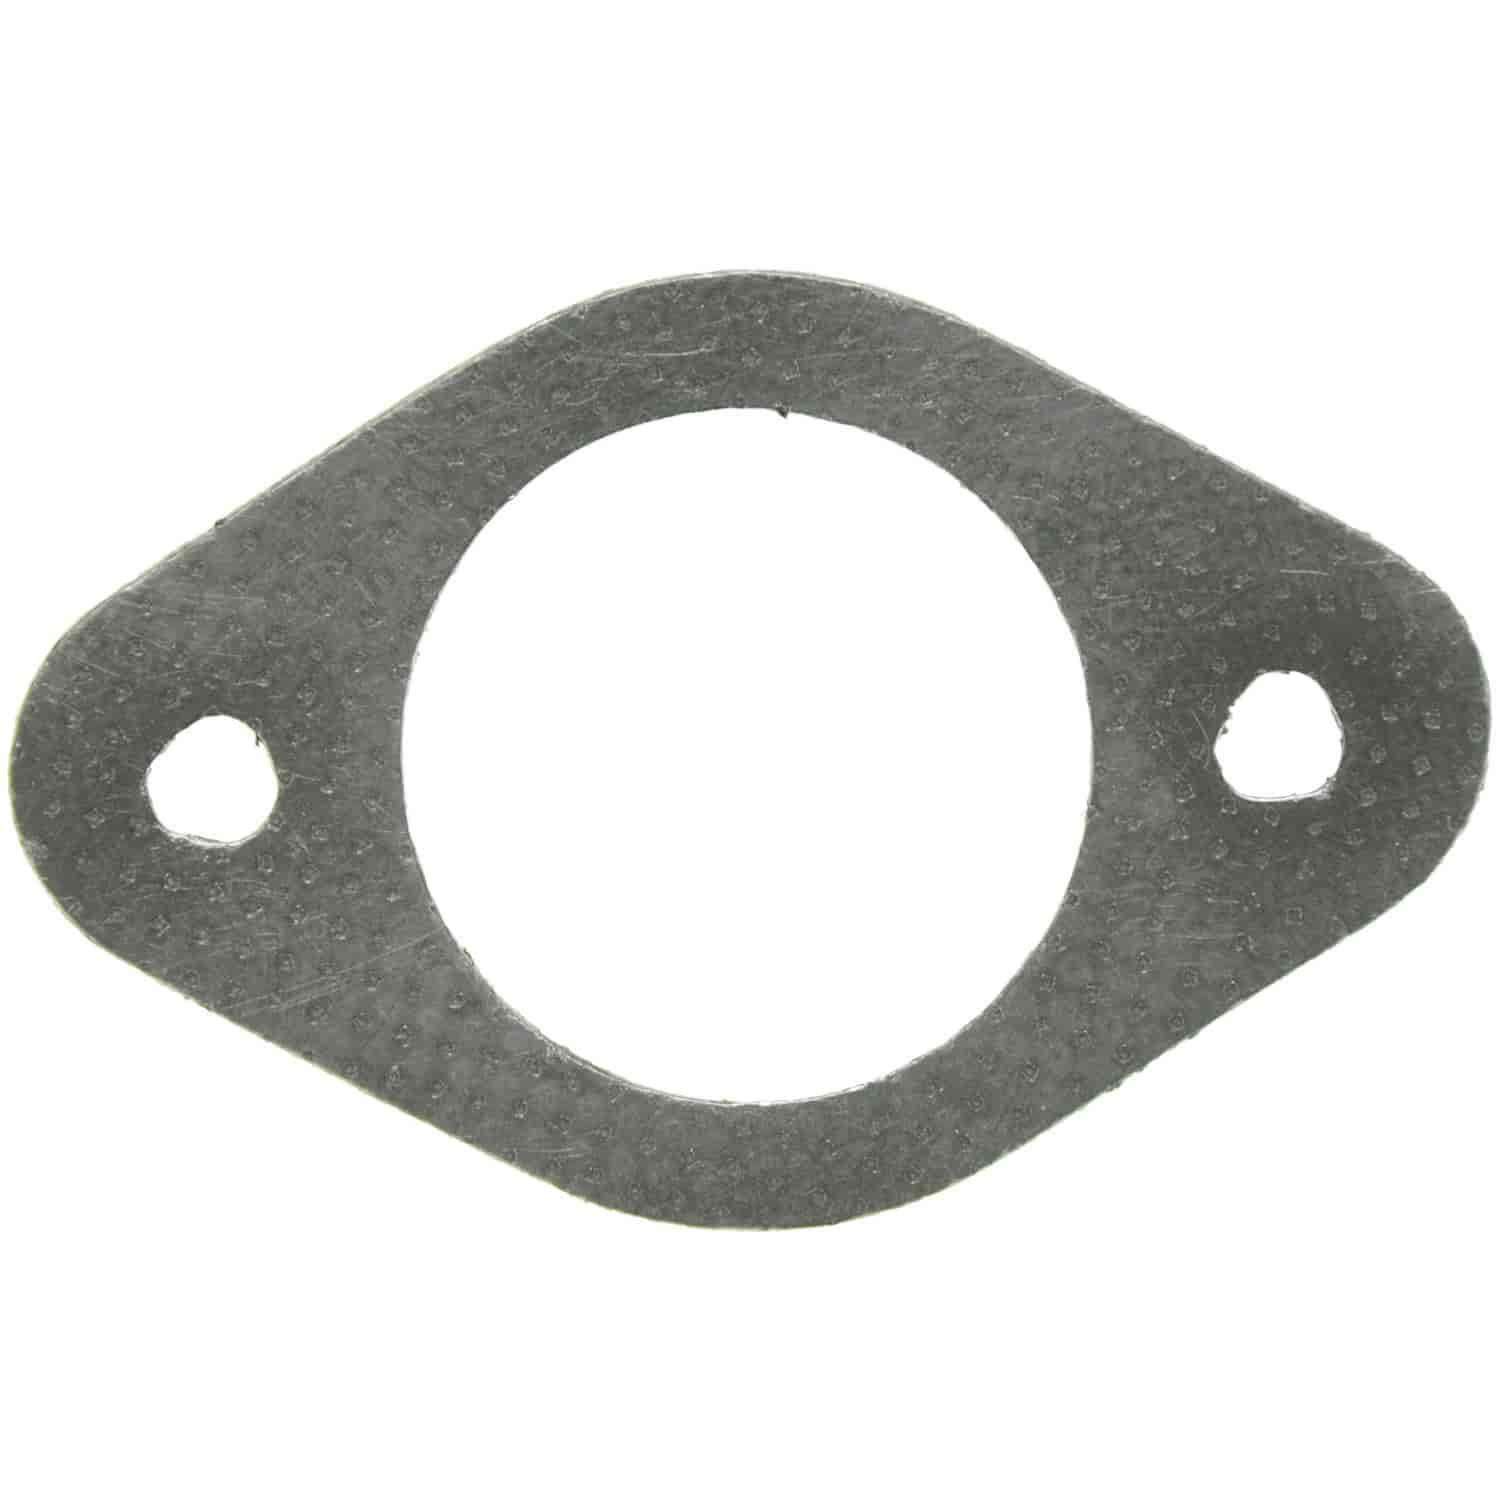 Exhaust Pipe Flange Gasket Chry-Pass Car Dodge Trk. 3.3L 3.8L 2008